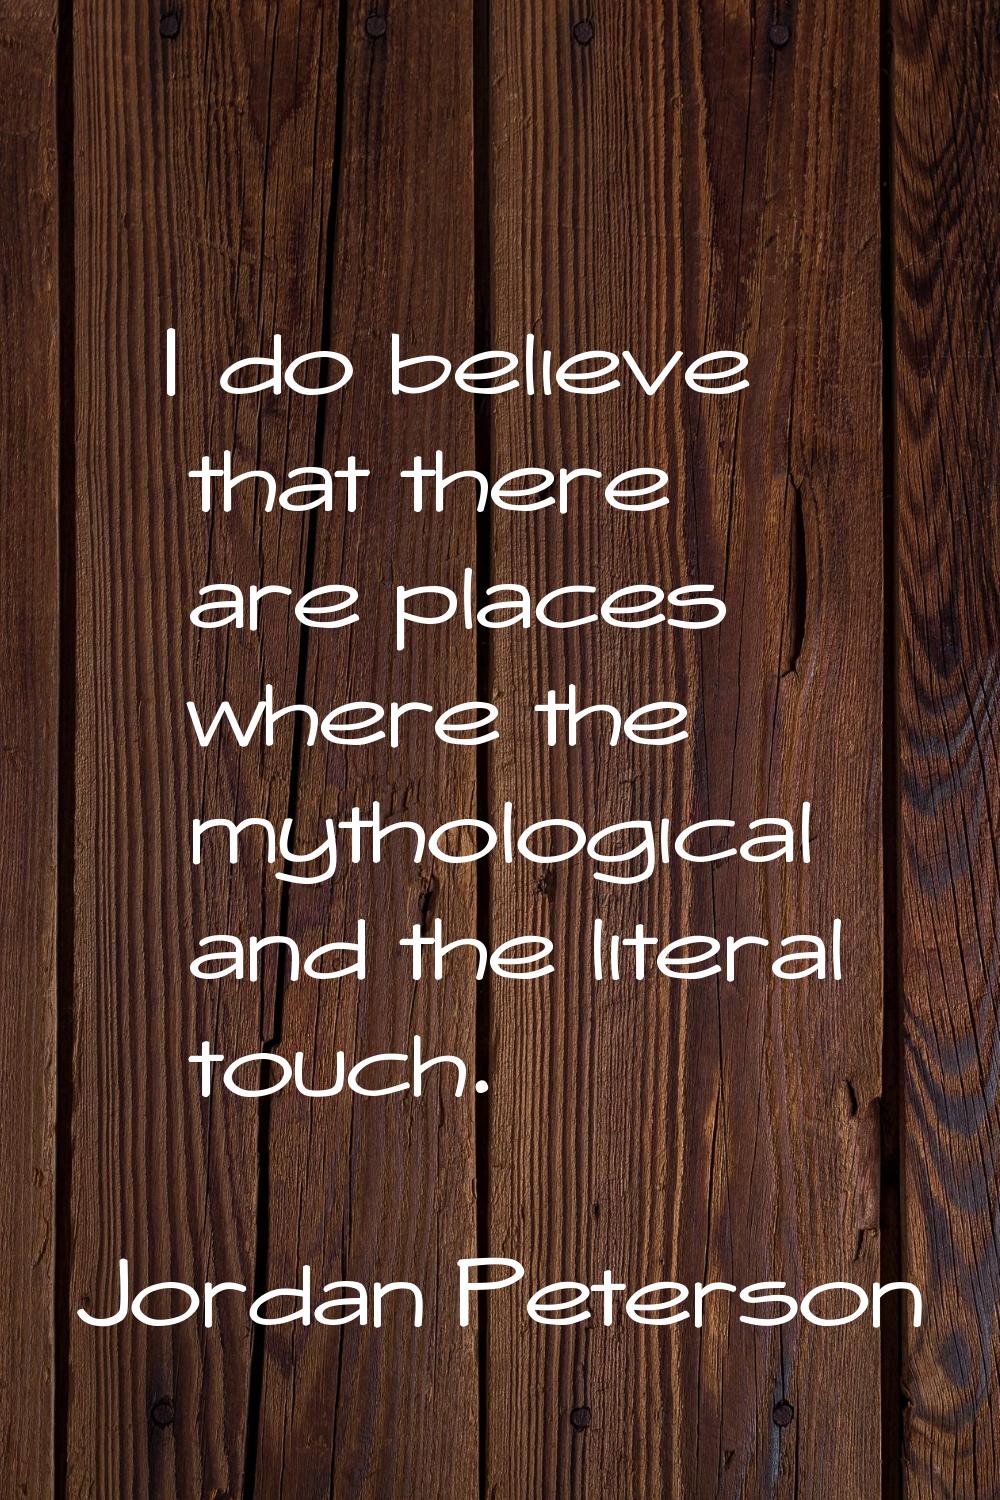 I do believe that there are places where the mythological and the literal touch.